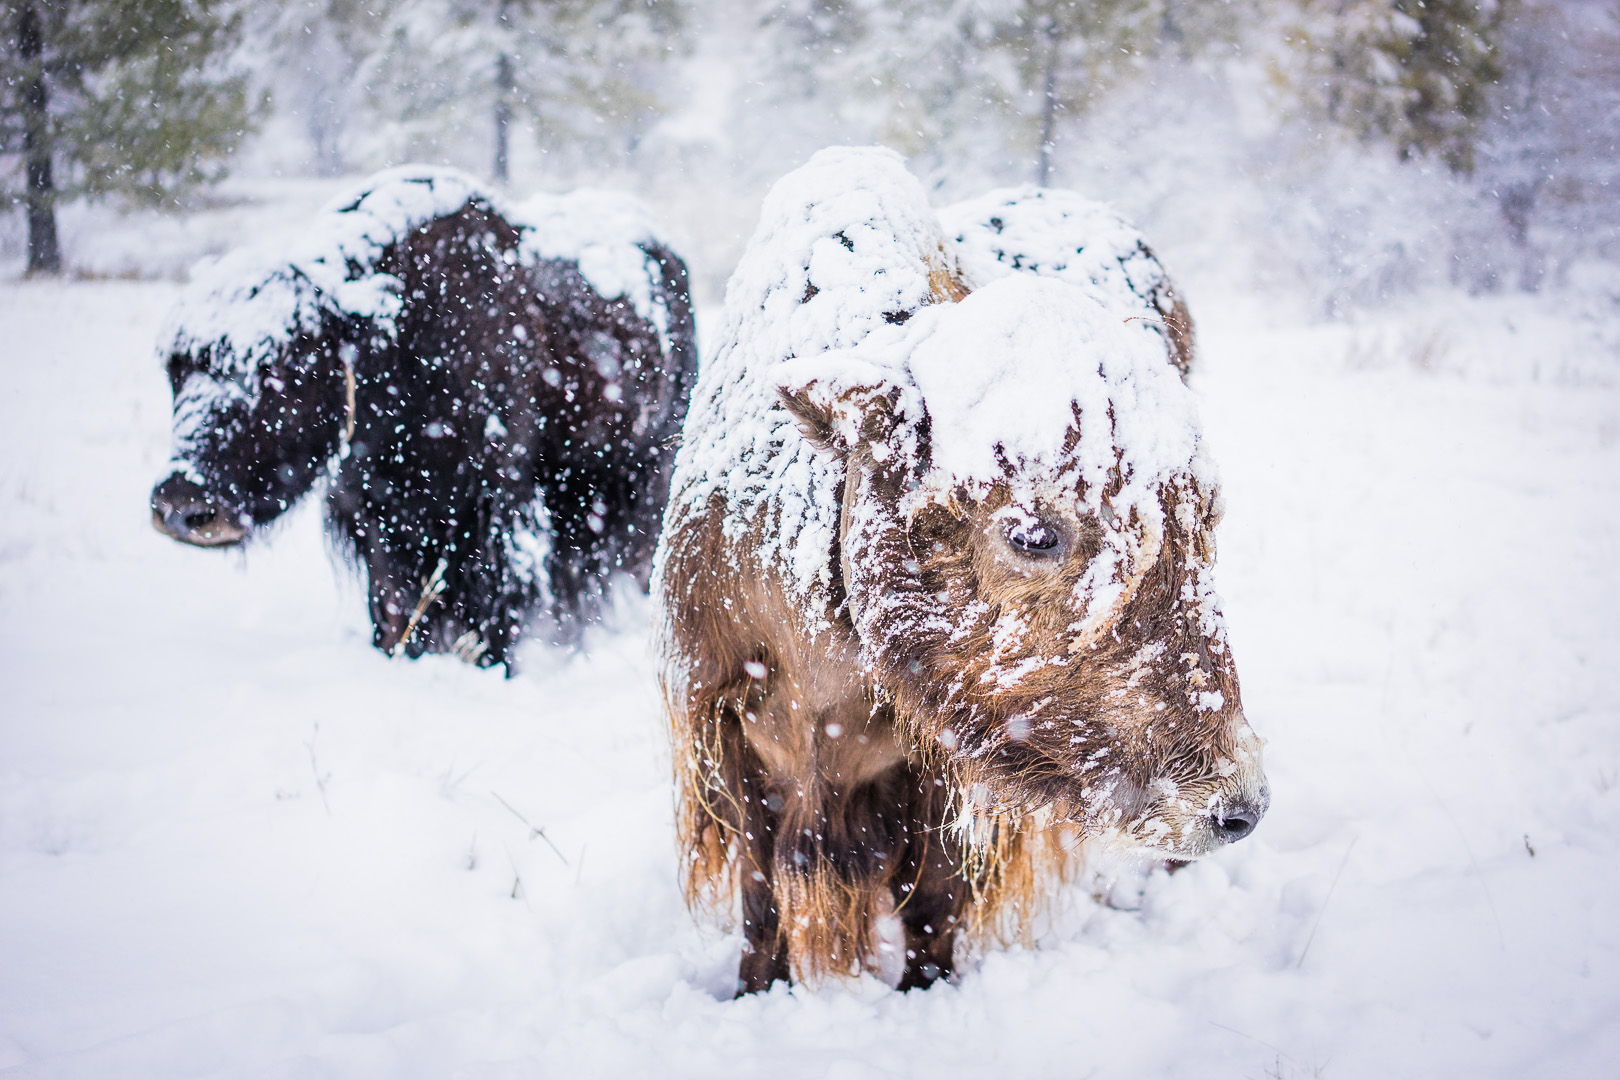 Winters here are unbelievably fierce - but man and animal must adapt and survive. As the biting northerly wind begins to blow, these yaks will endure months of temperatures as low as -40°C.